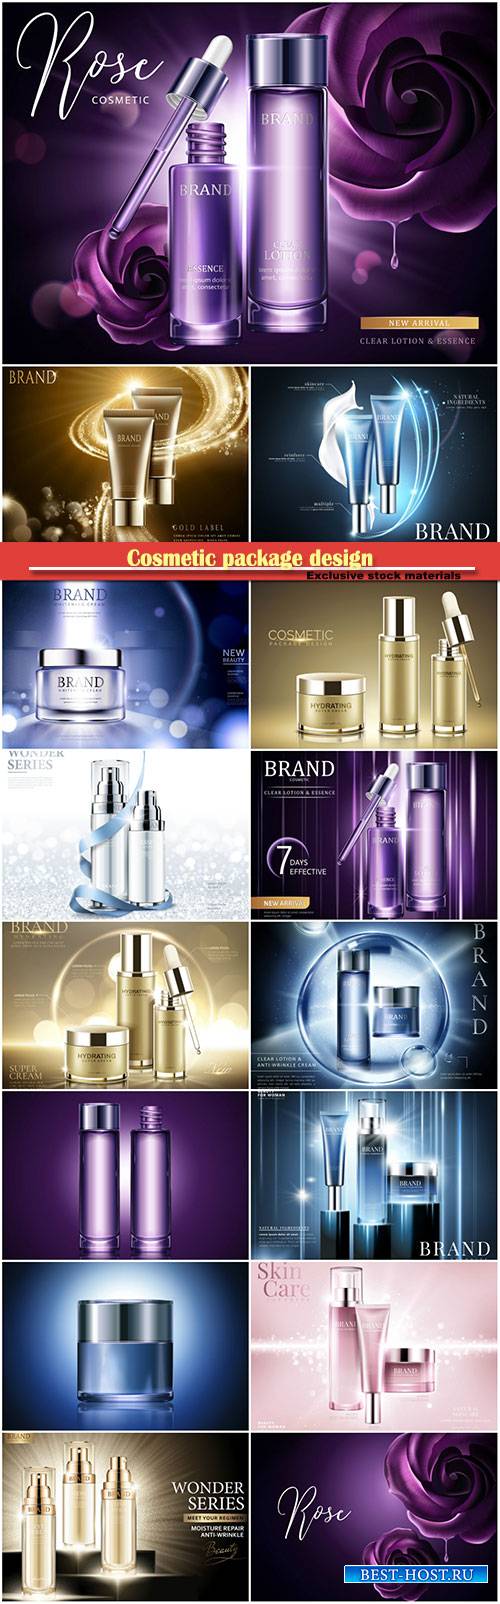 Cosmetic package design in 3d vector illustration